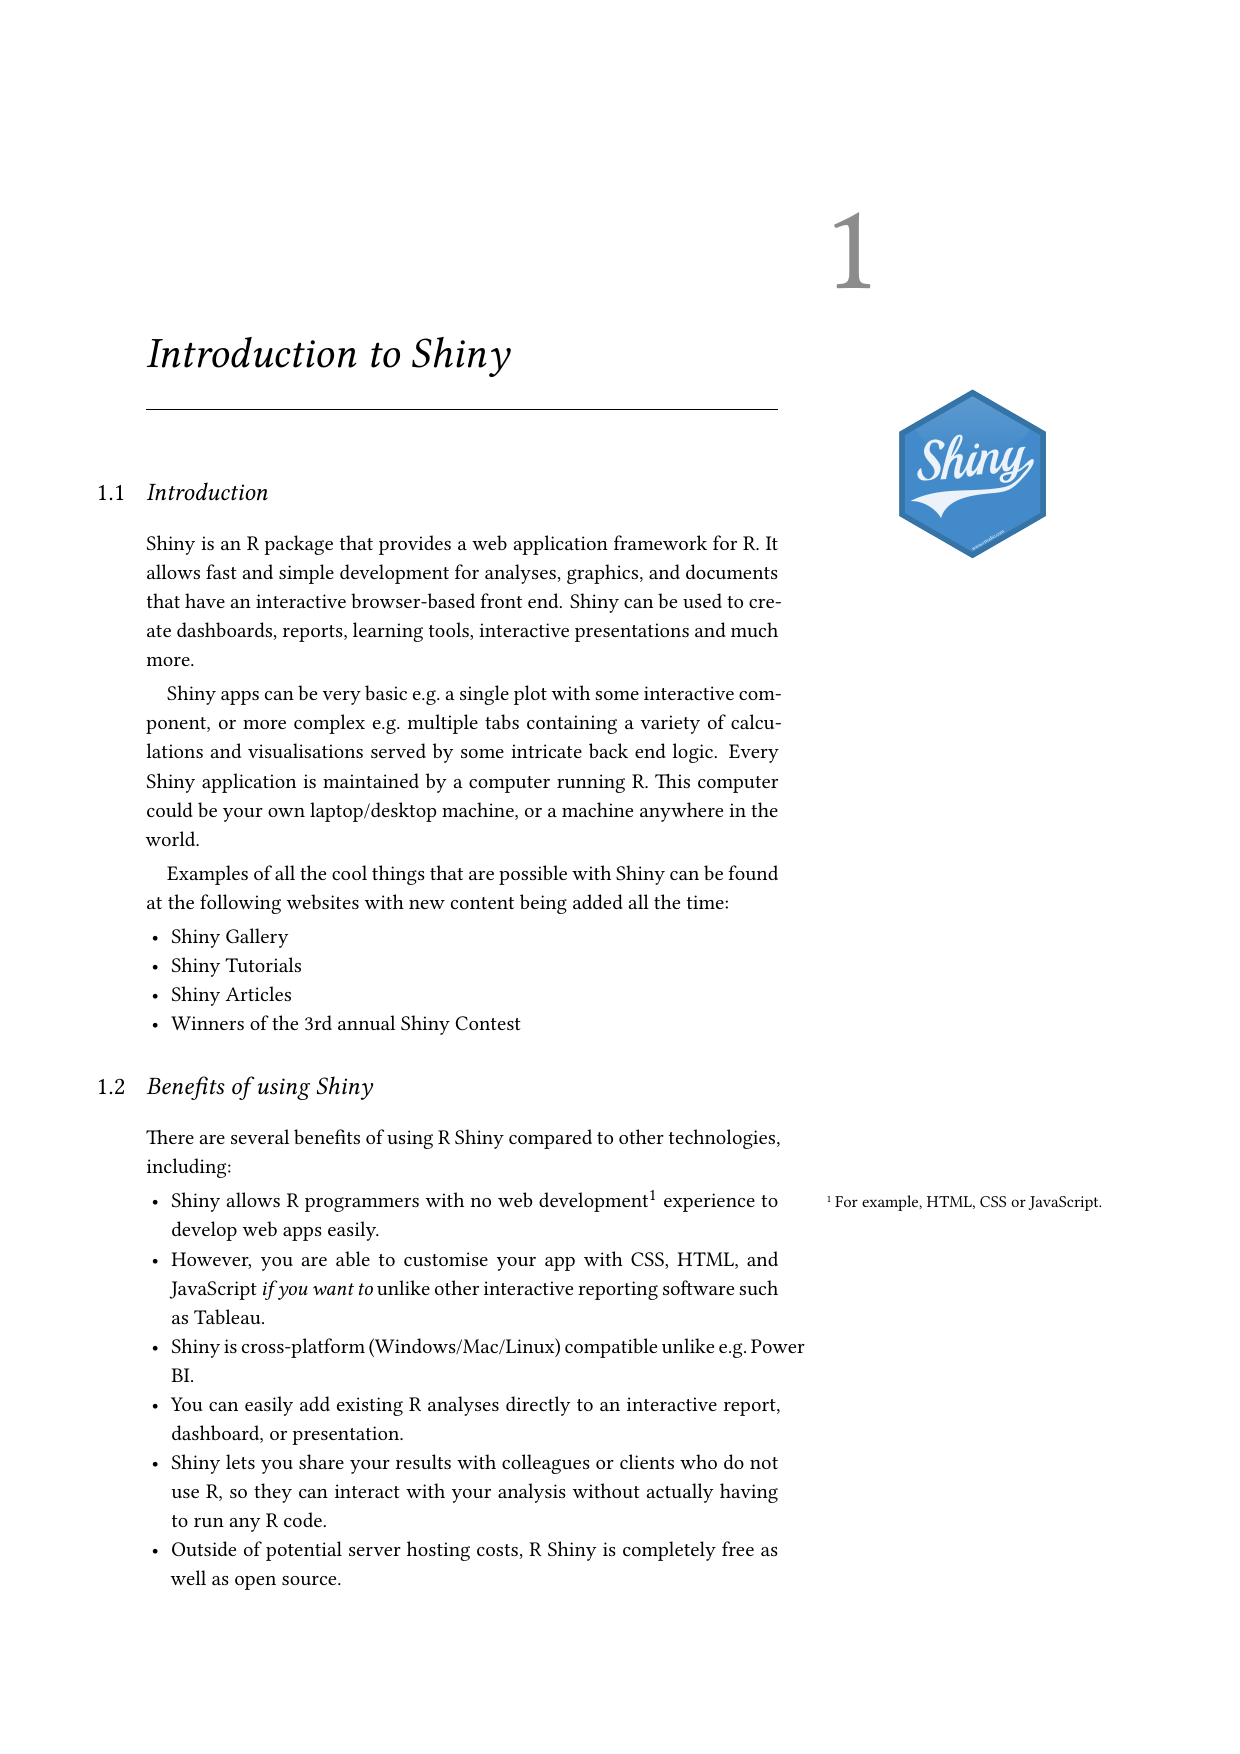 Example course material for 'Introduction to Shiny'